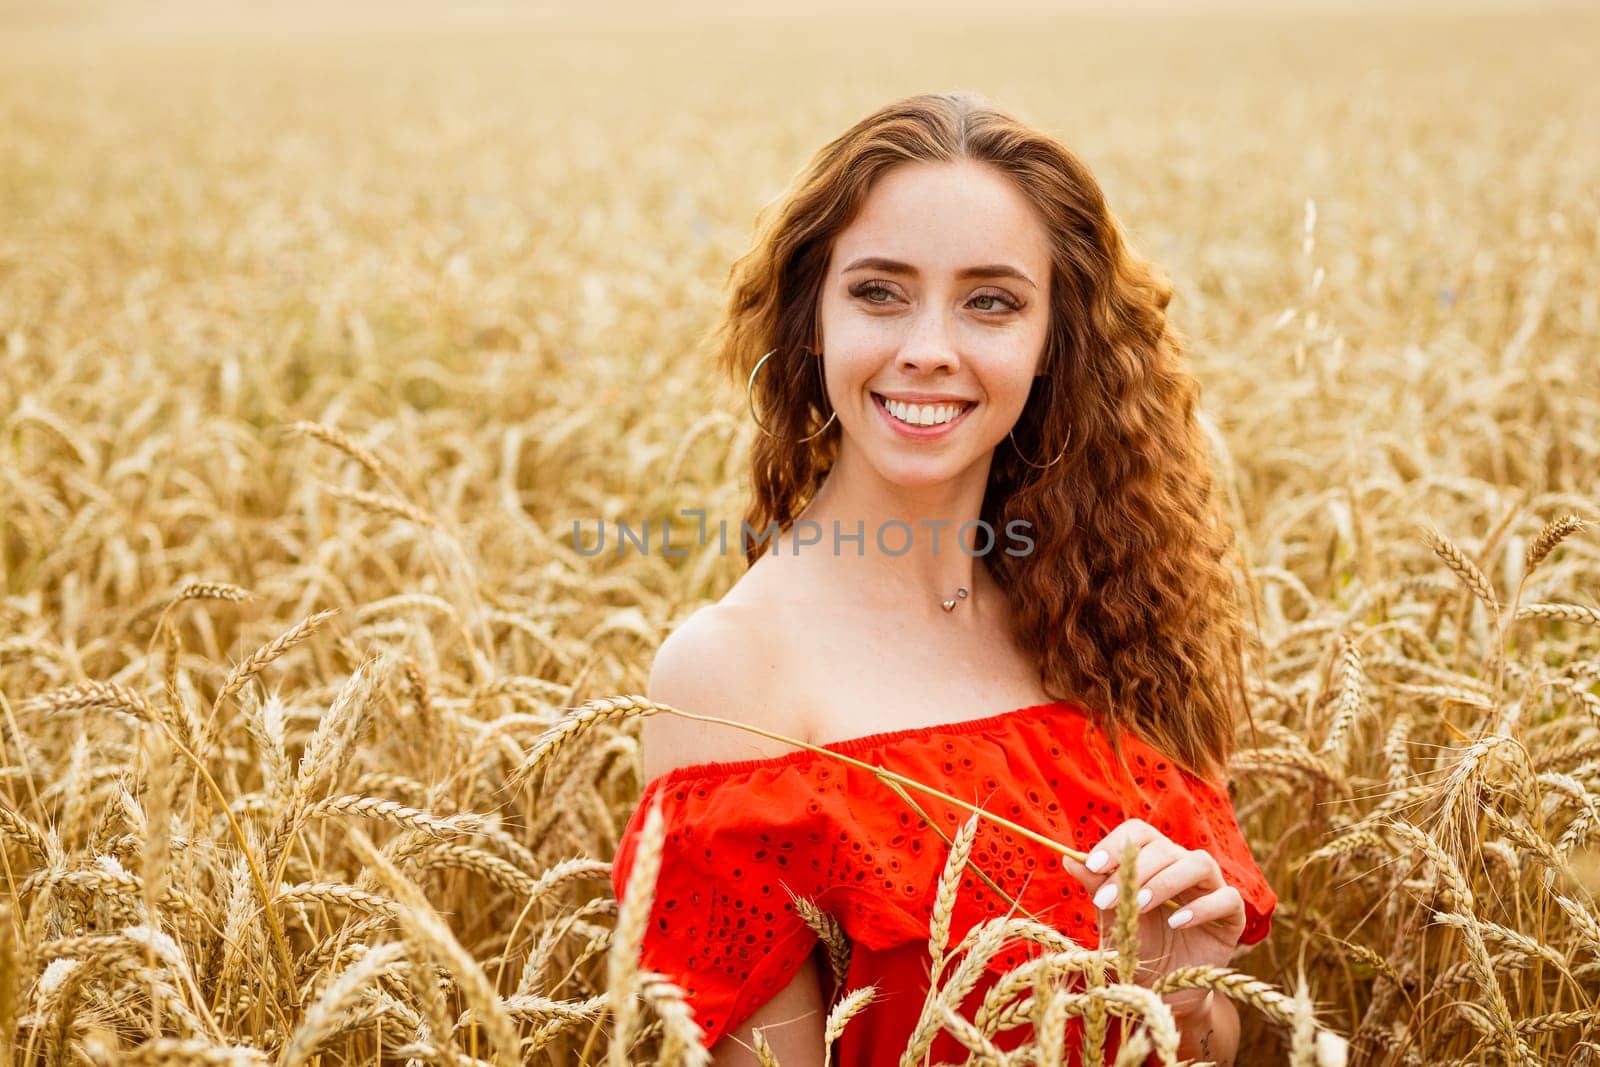 Style redhead young woman in red clothe tay view yellow wheat nature. Cute girl smiles with a snow-white toothy smile. Natural beauty on a natural background. Caucasian real girl.